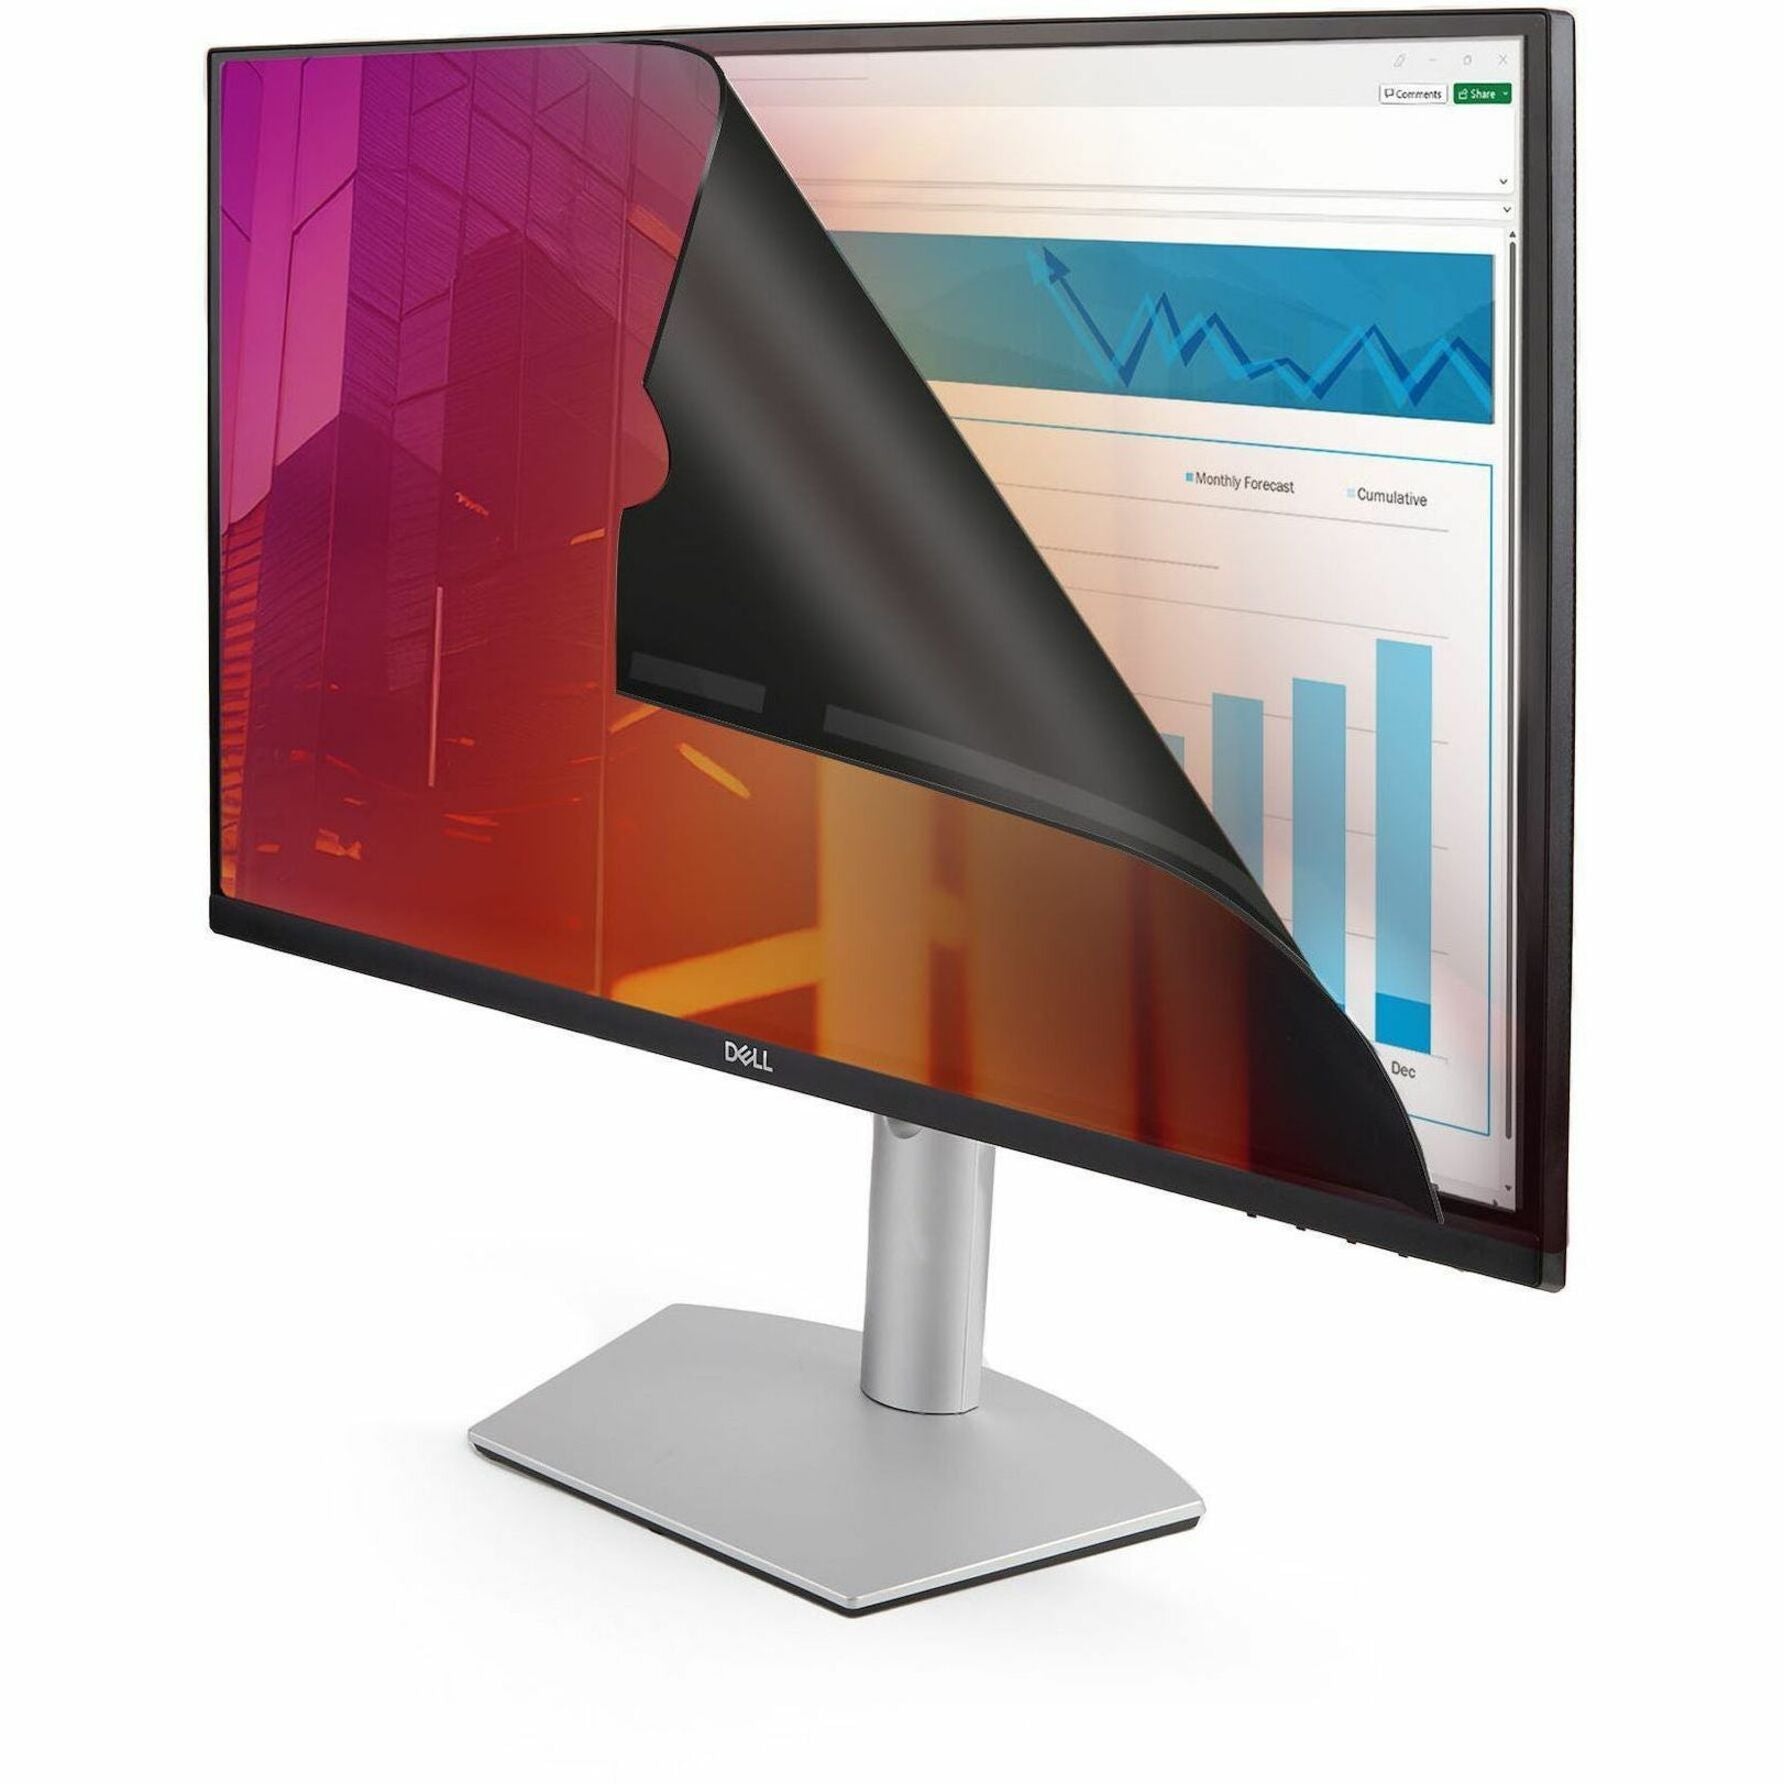 StarTech.com 2461G-PRIVACY-SCREEN Privacy Screen Filter, Limited Viewing Angle, Eyesight Protection, Removable, Residue-free, 24" Display Size Supported